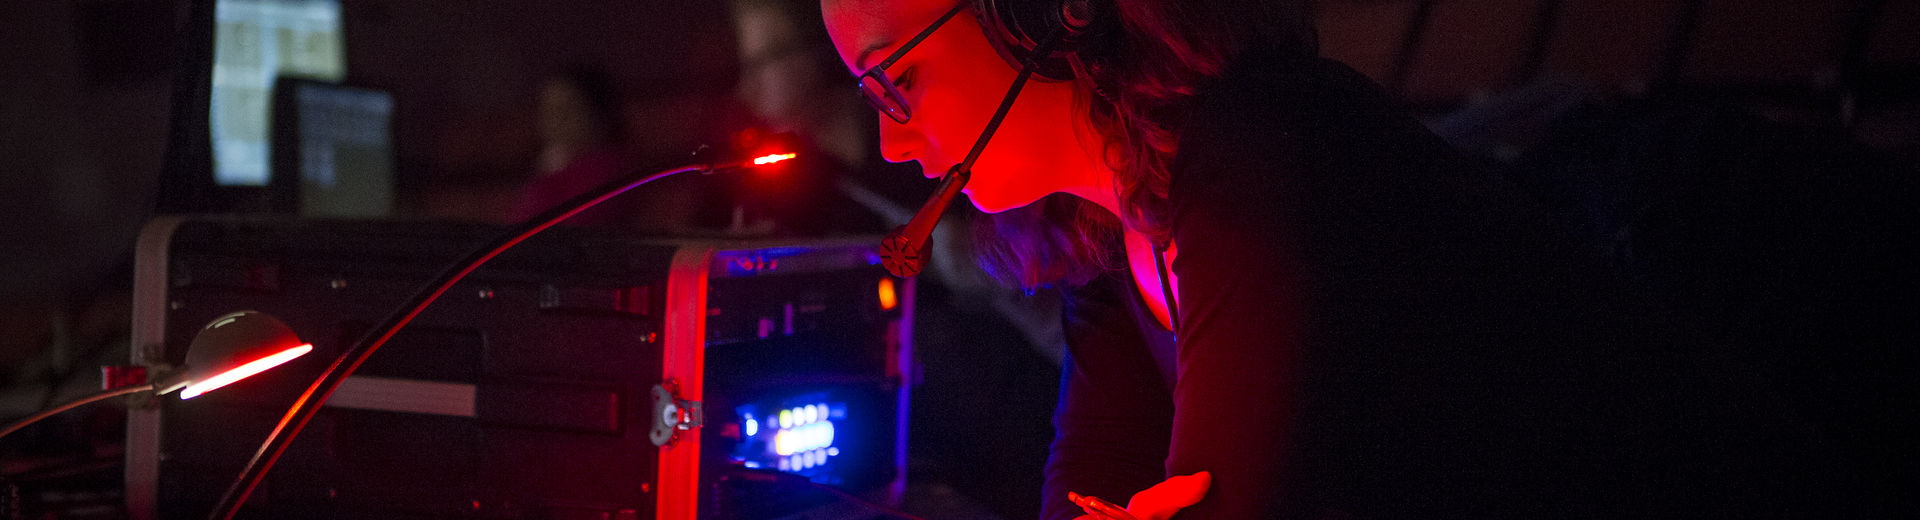 A woman with a headset reads in a darkened room backstage.